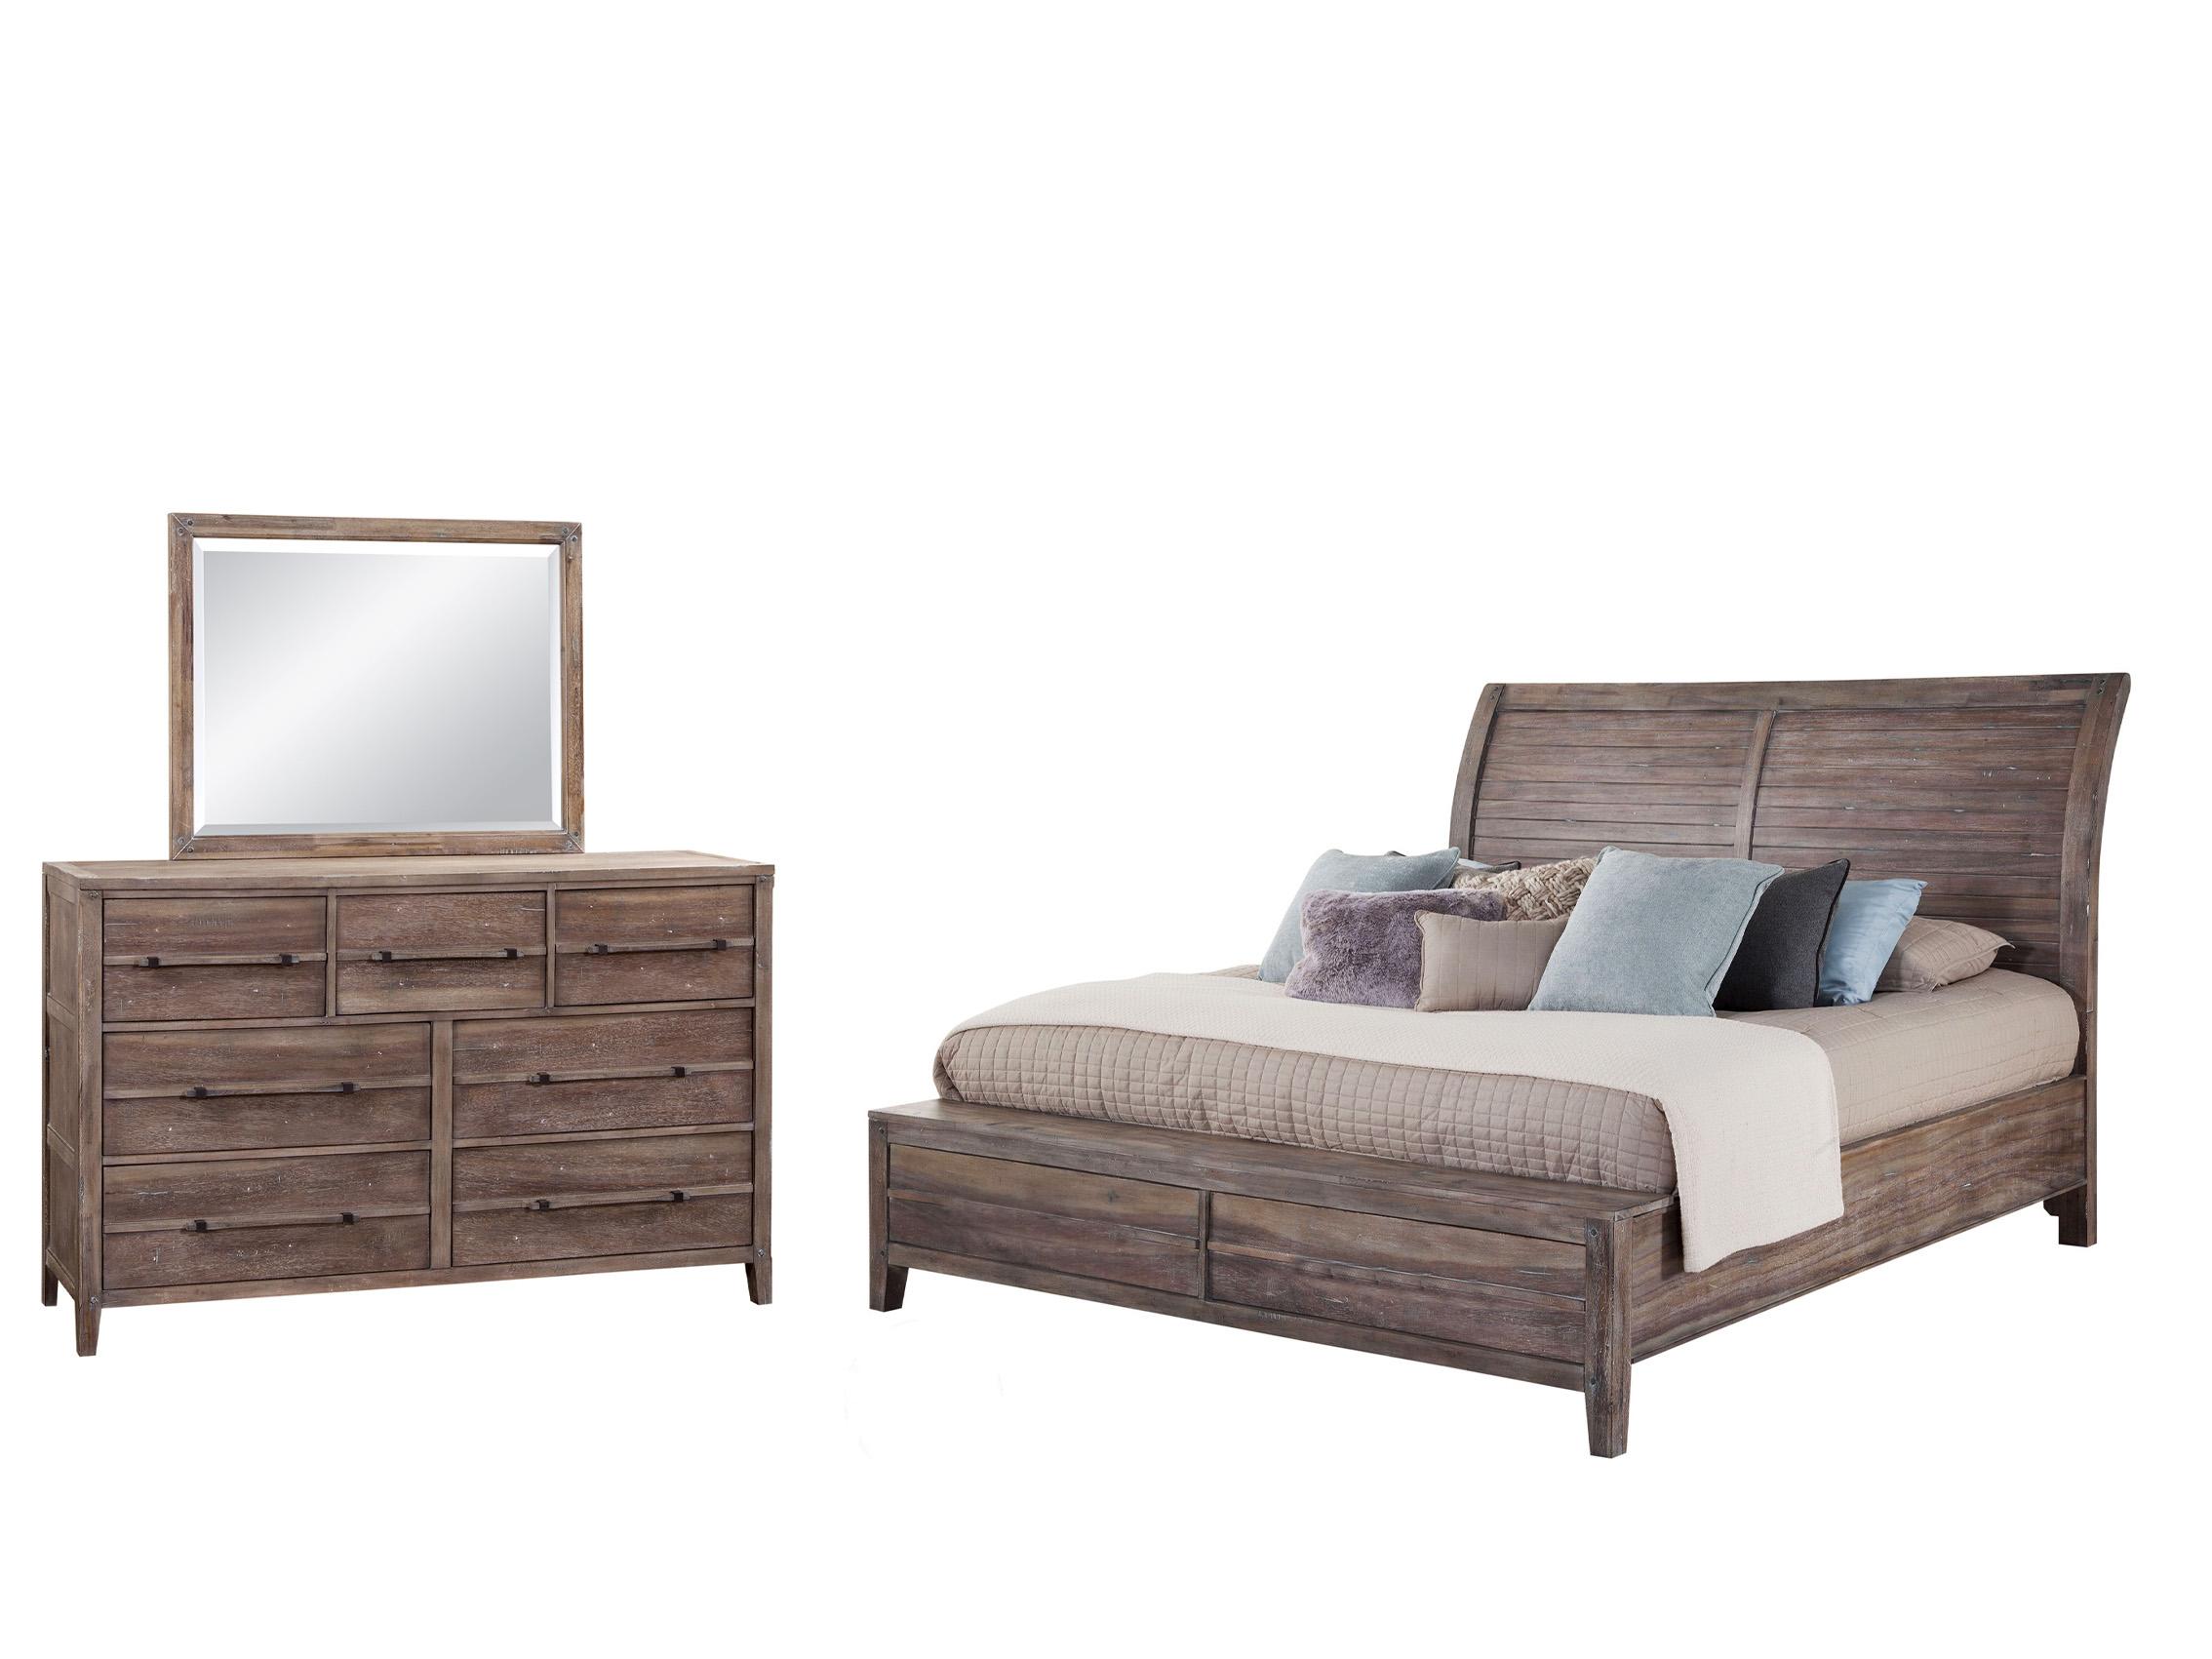 Classic, Traditional Sleigh Bedroom Set AURORA 2800-50SLP 2800-QSLPN-3PC in Driftwood, Gray 